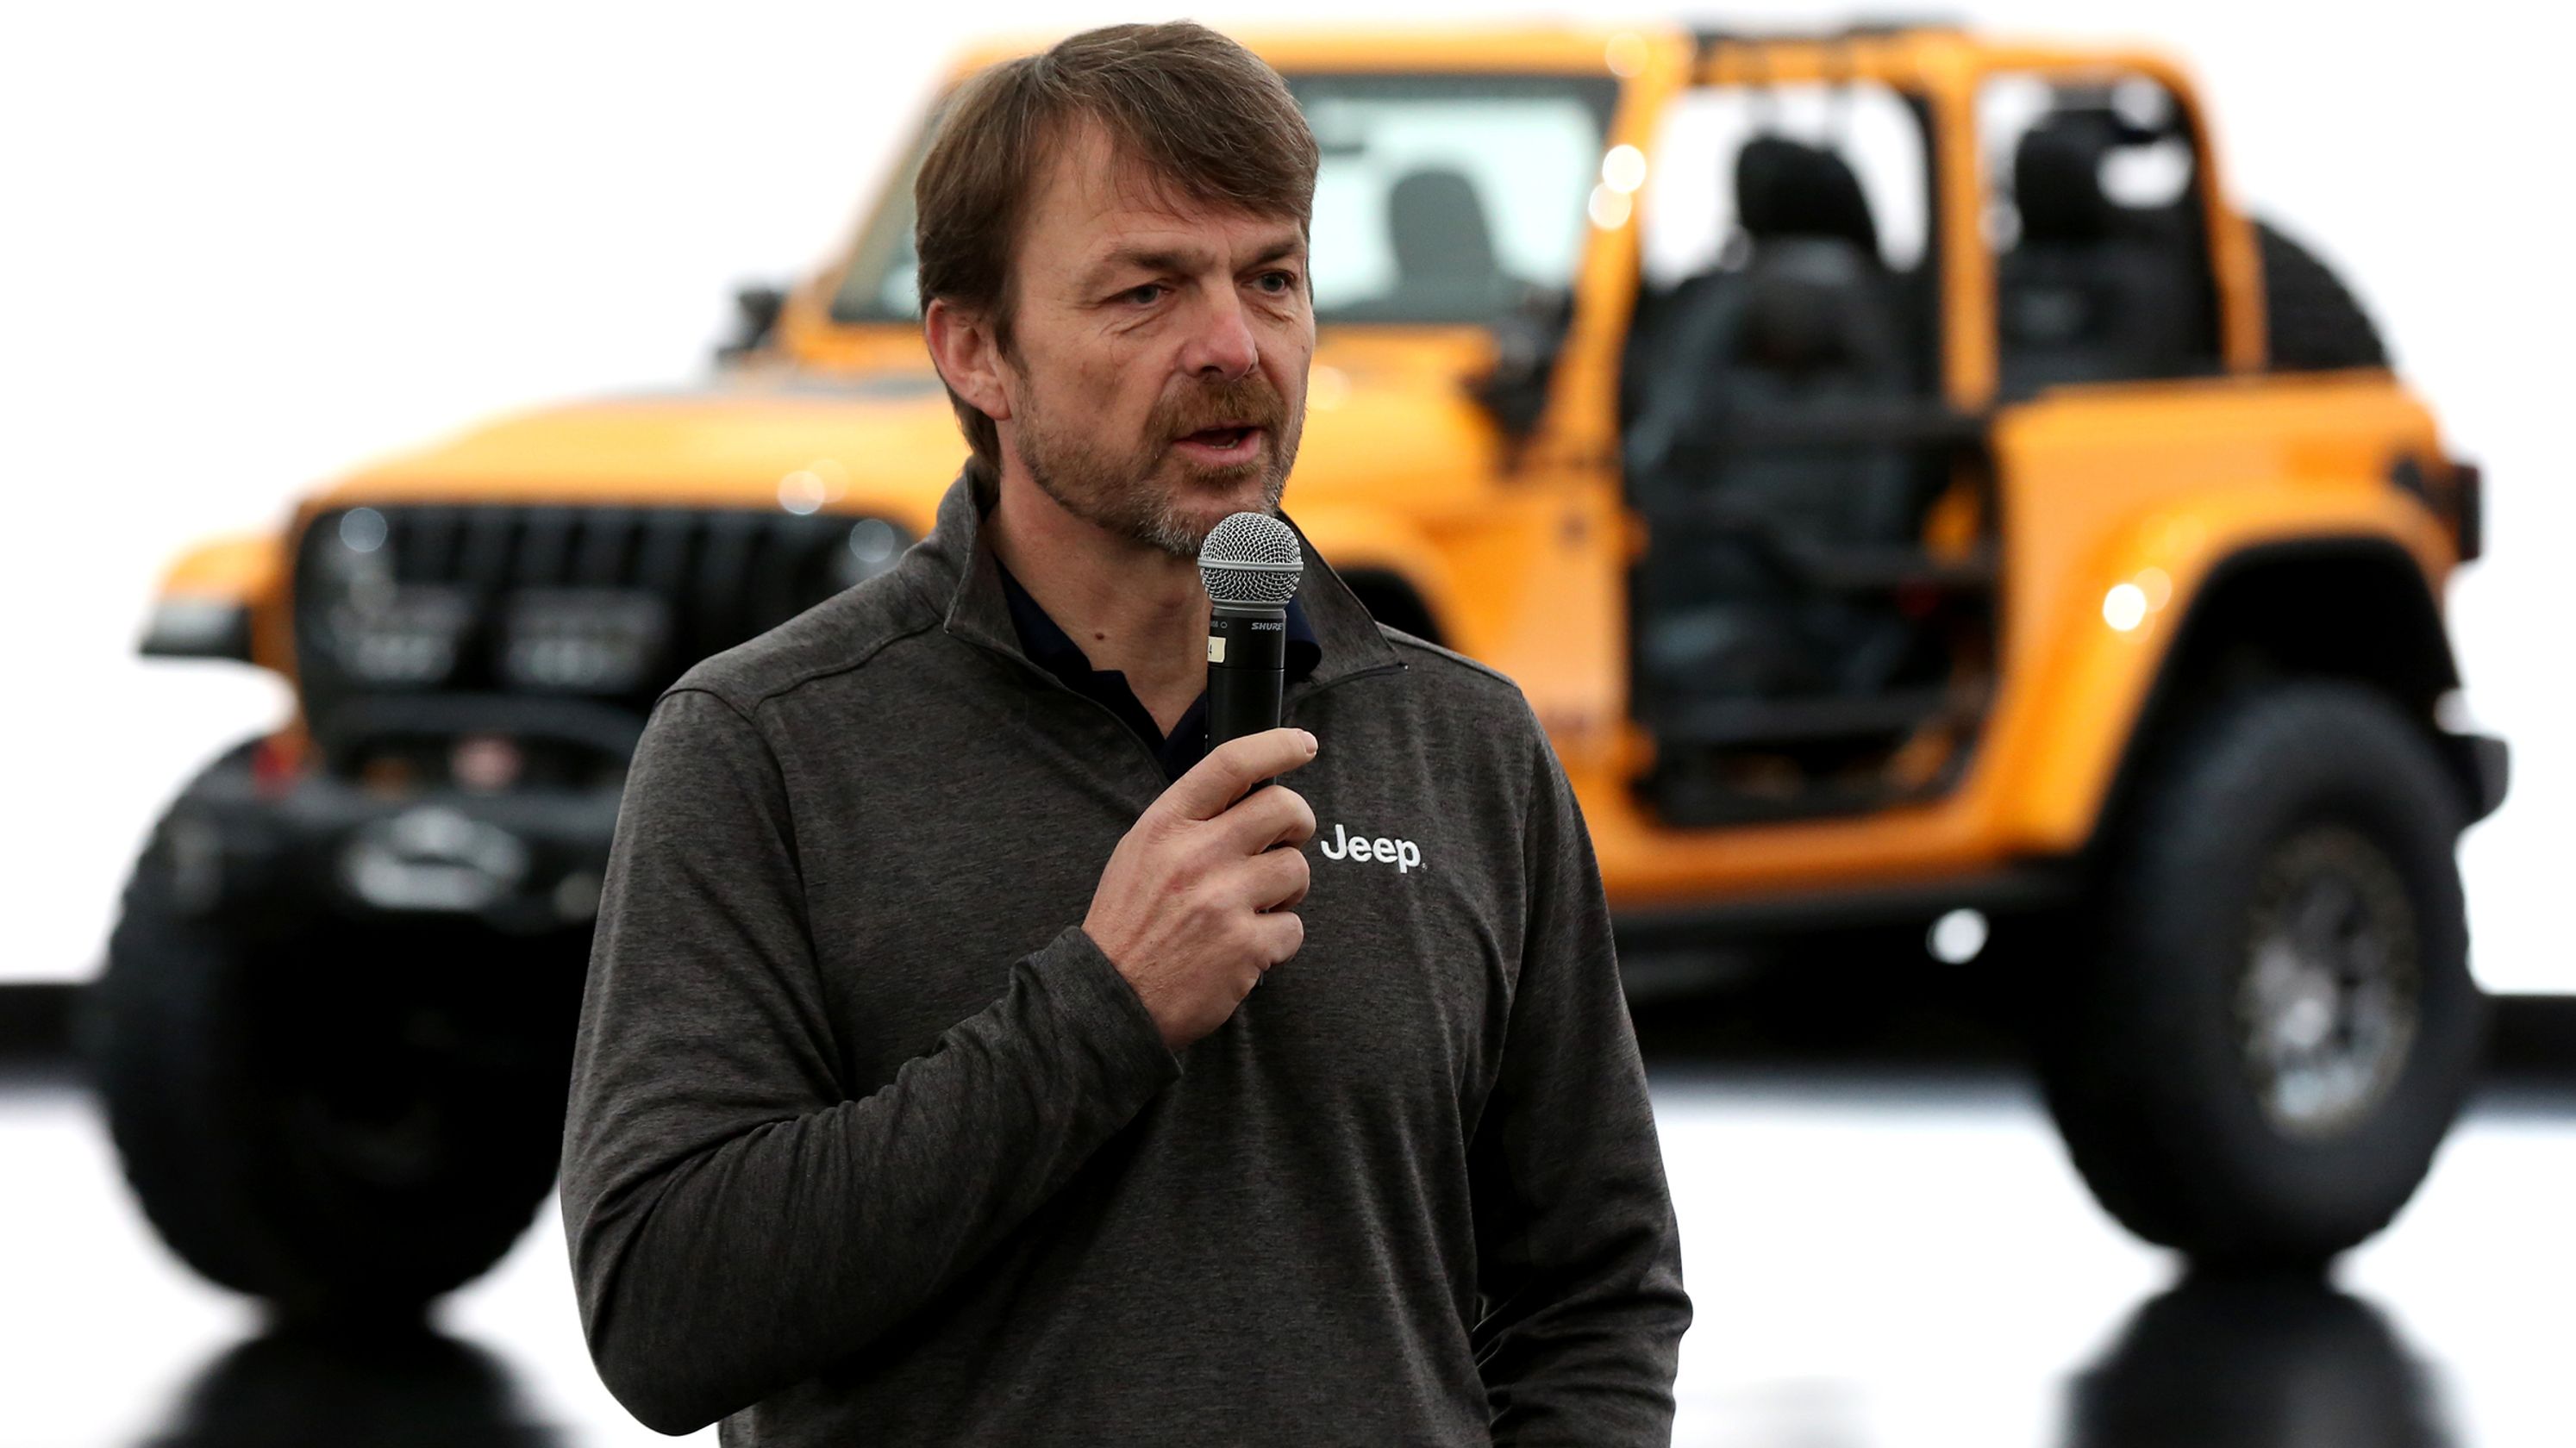 BREAKING: Jeep Head Mike Manley Named New CEO of Fiat Chrysler